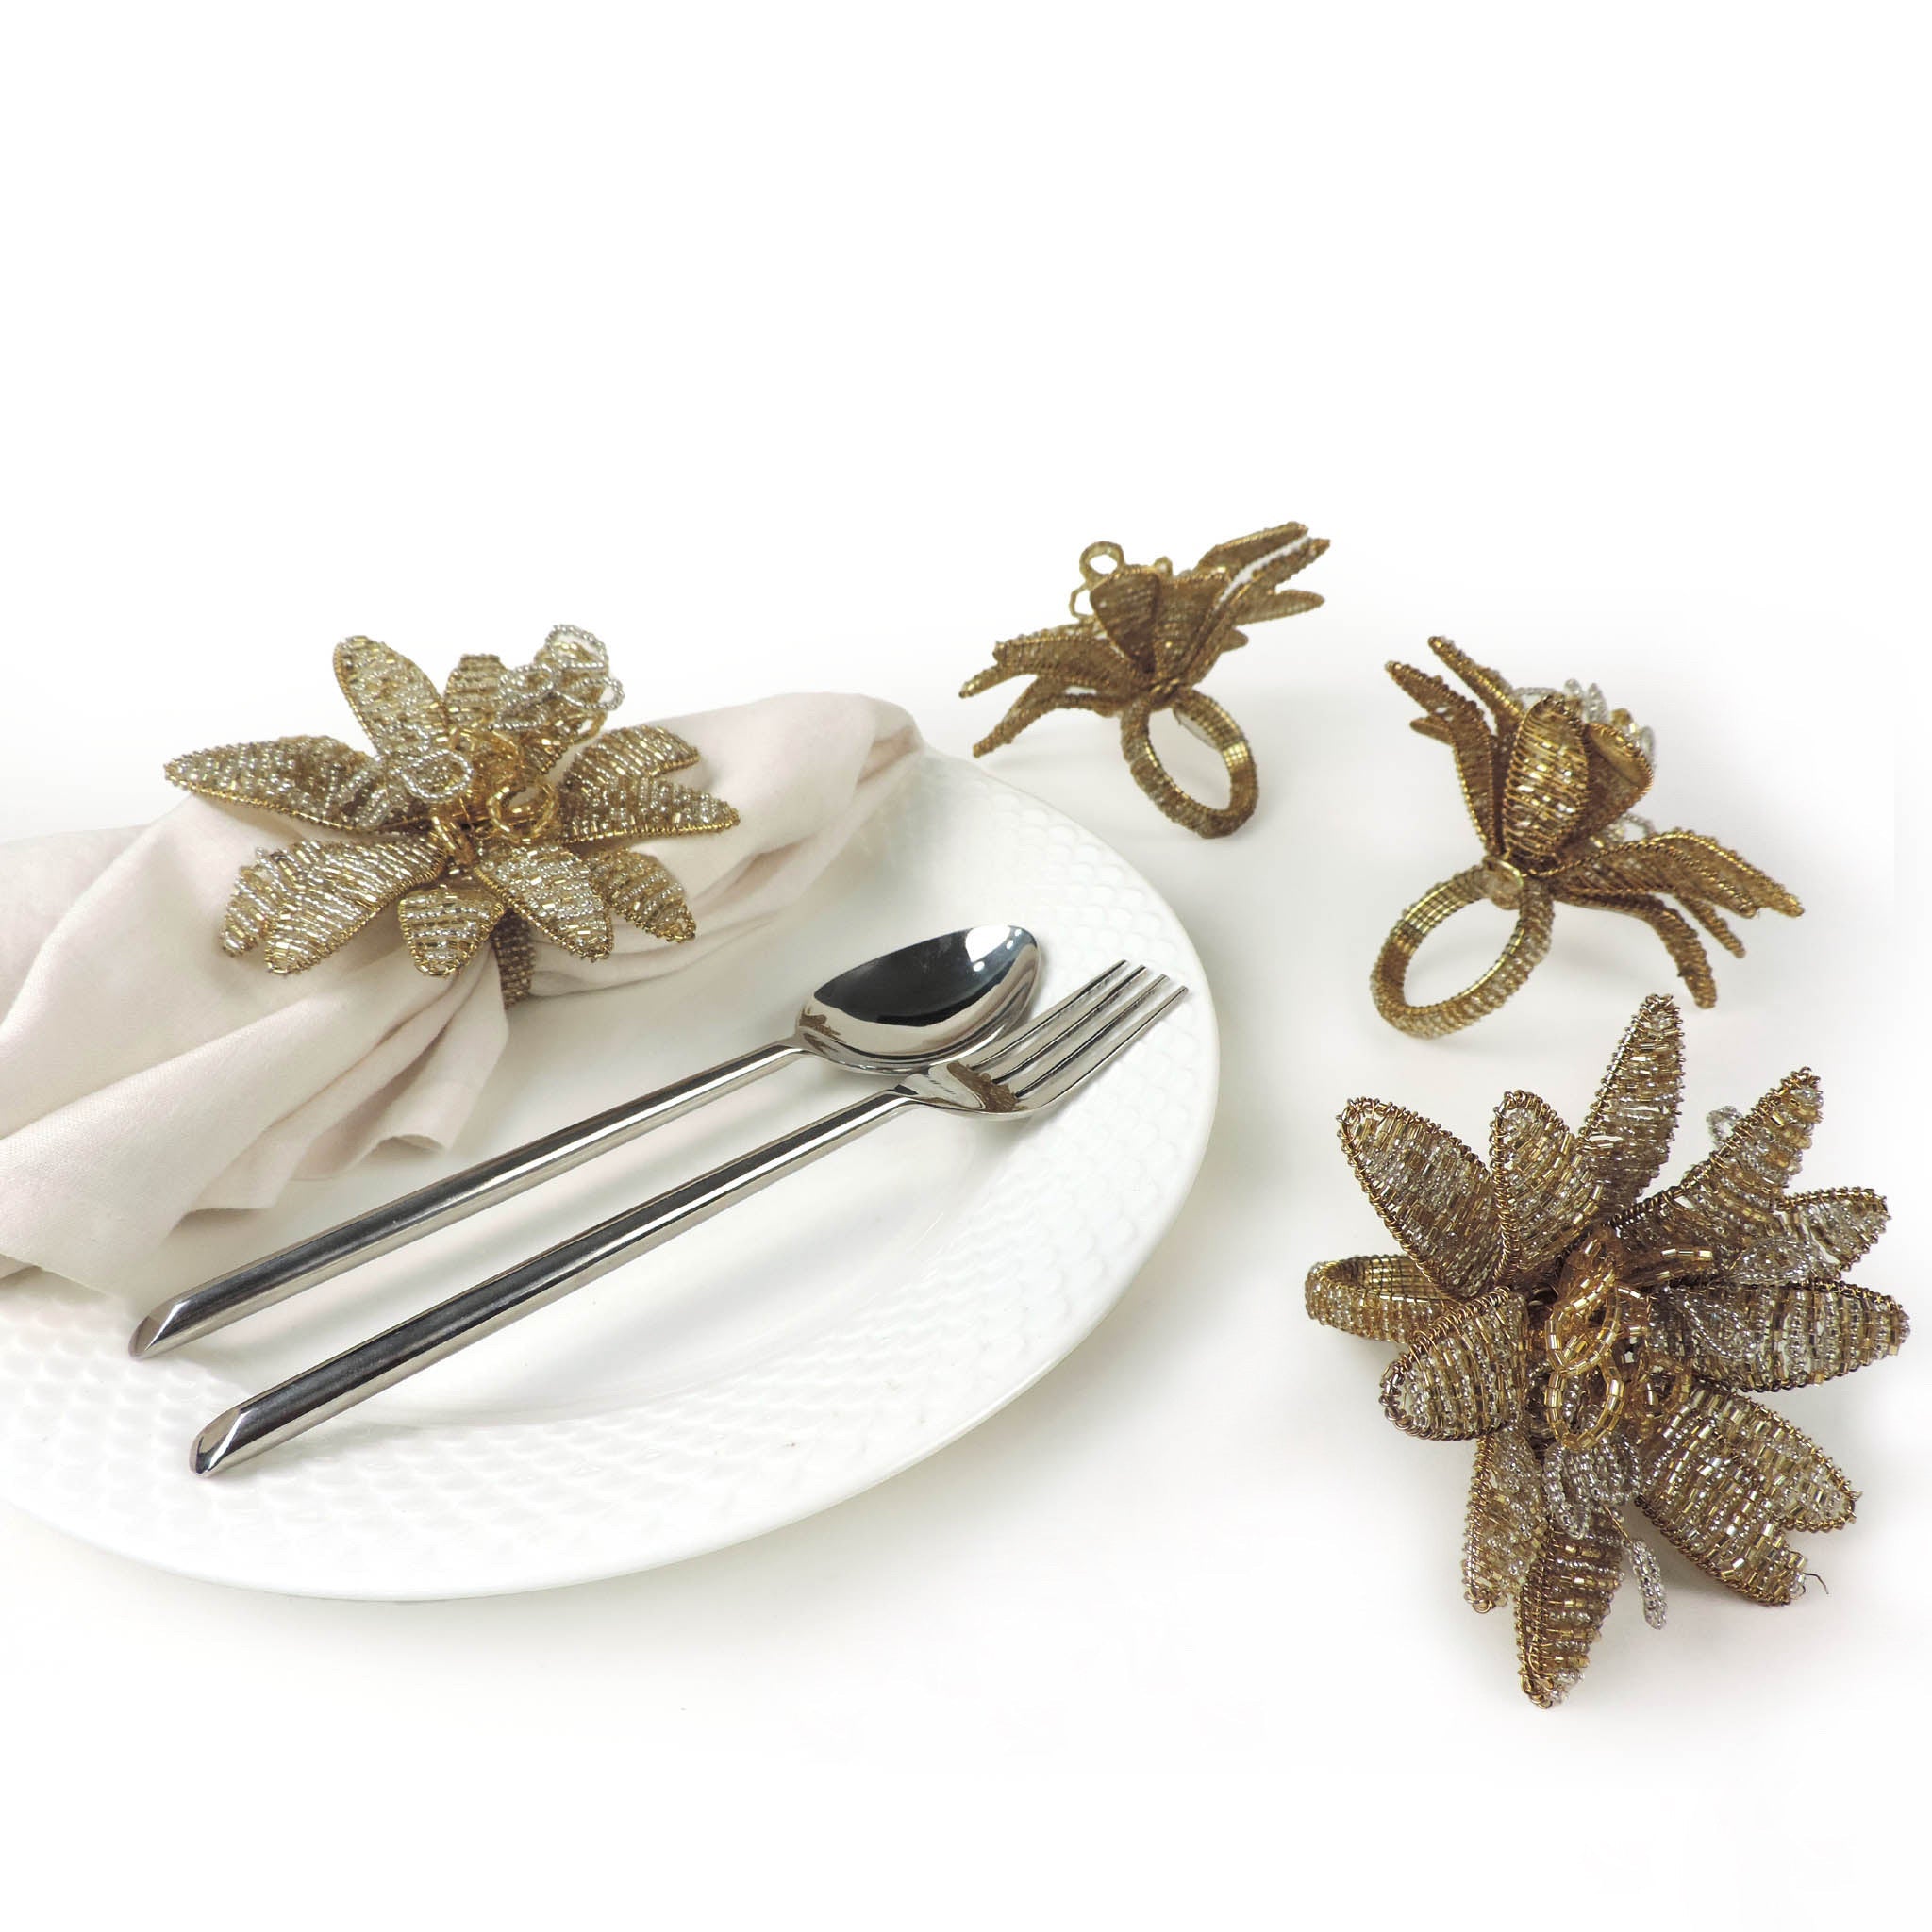 Gilded Lily Napkin Ring in Gold & Silver, Set of 4